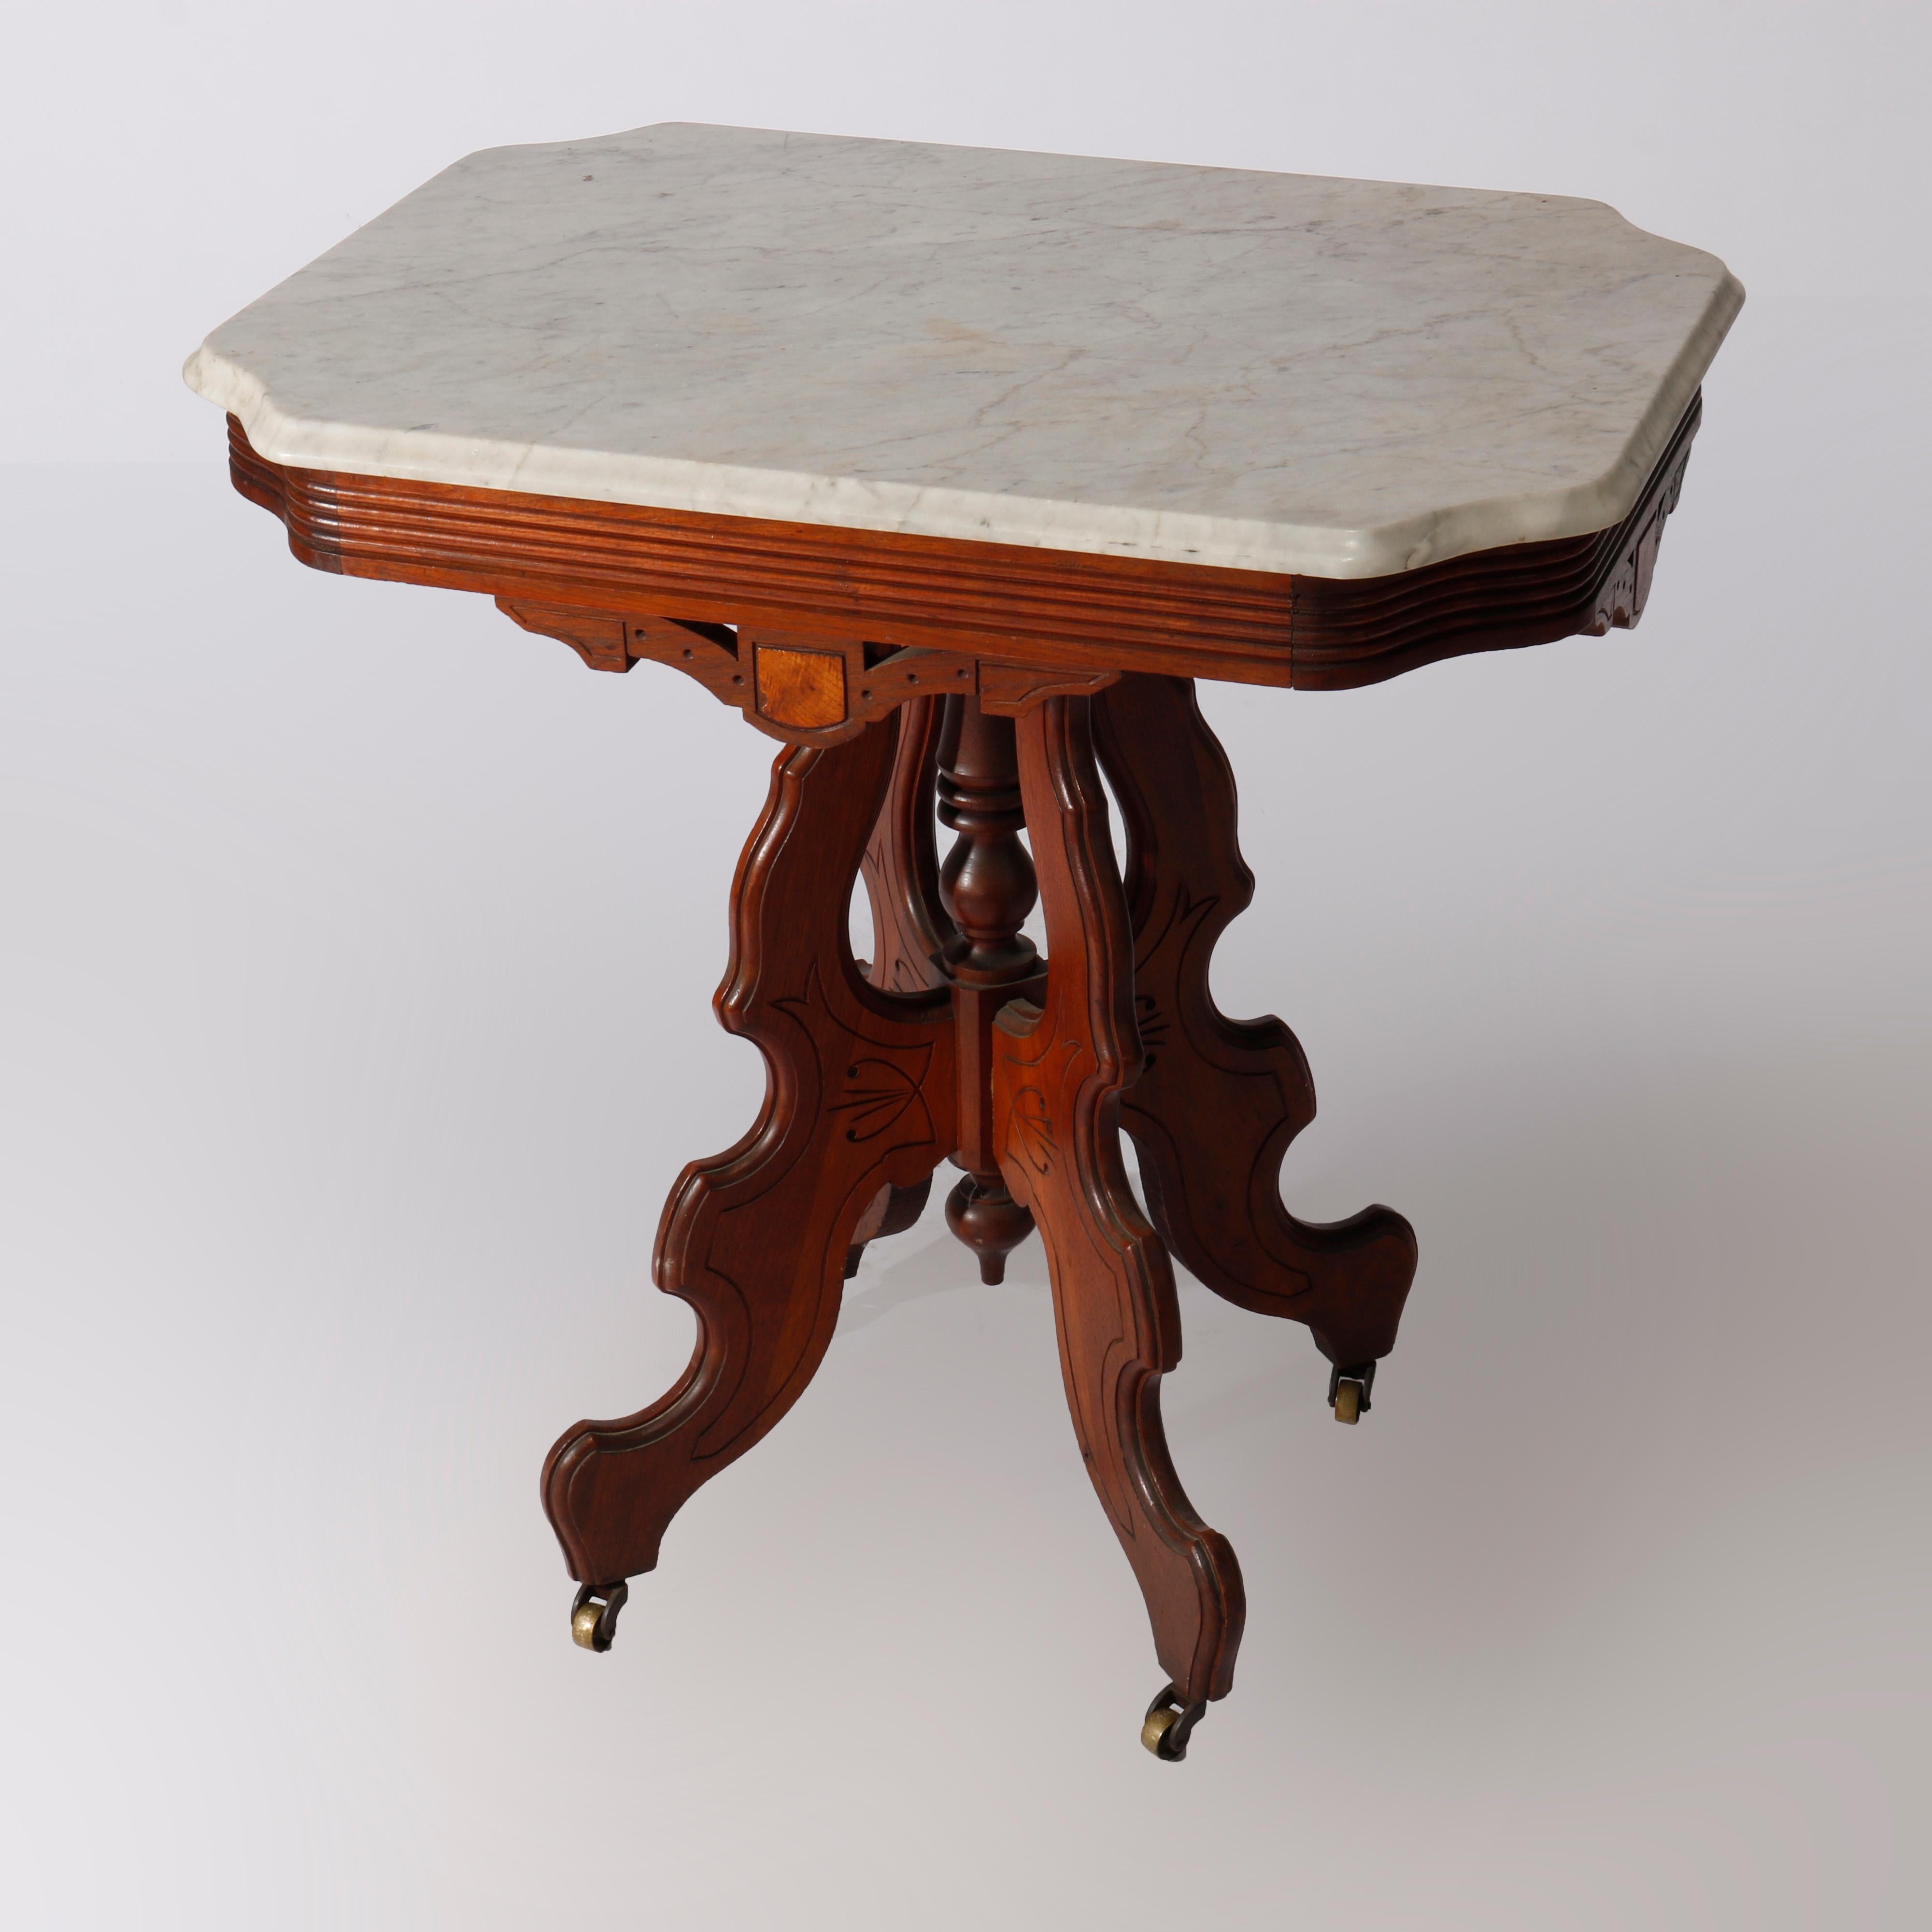 American Antique Eastlake Carved Walnut, Burl & Marble Top Parlor Table circa 1890